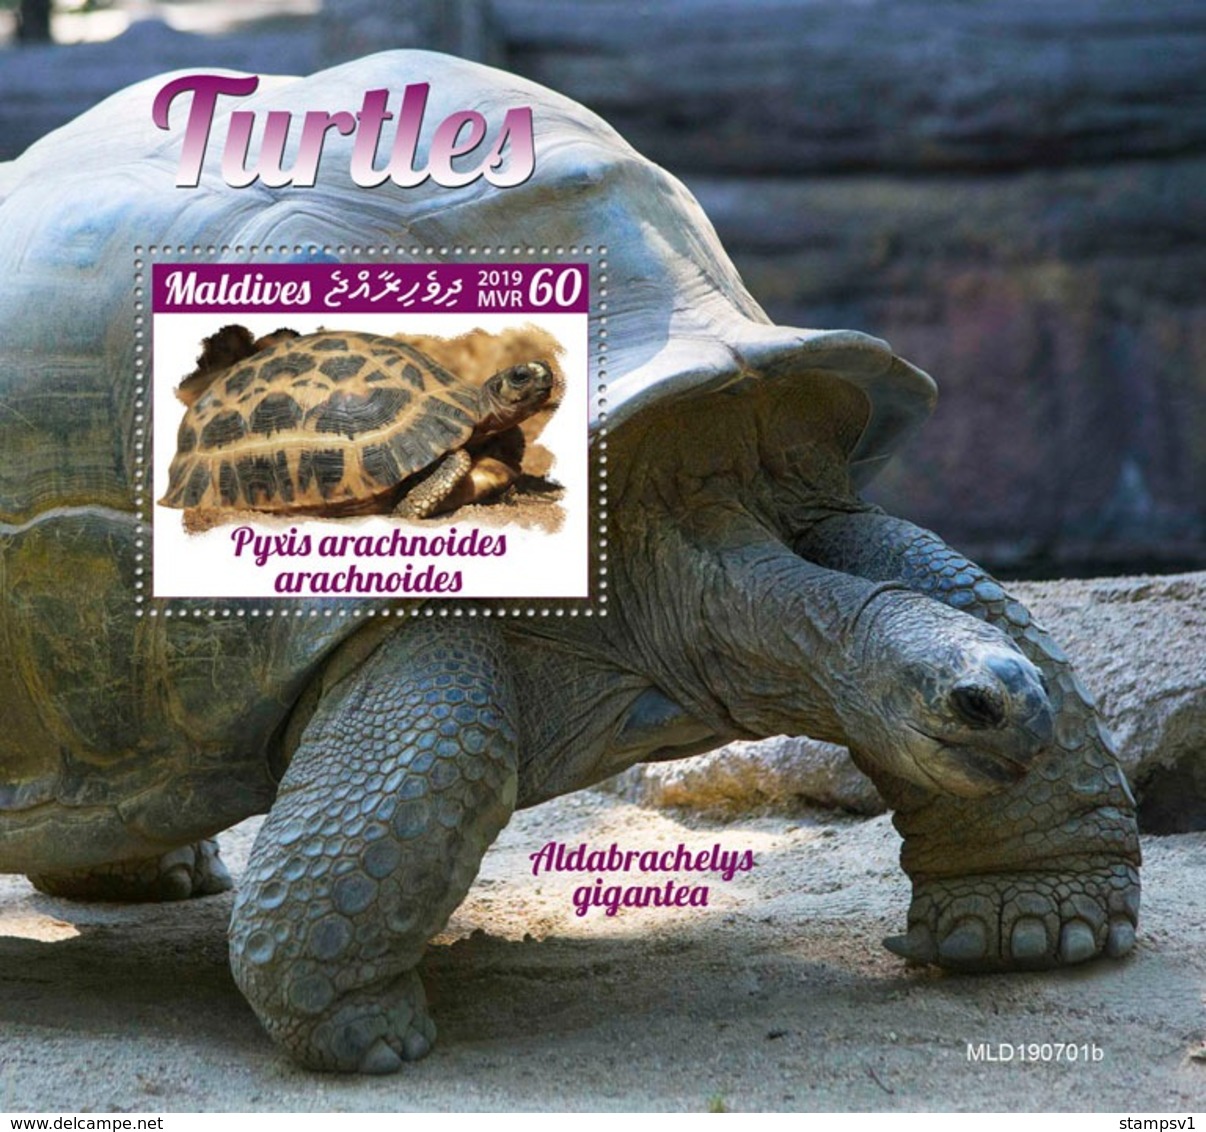 Maldives. 2019 Turtles. (0701b)  OFFICIAL ISSUE - Tortues